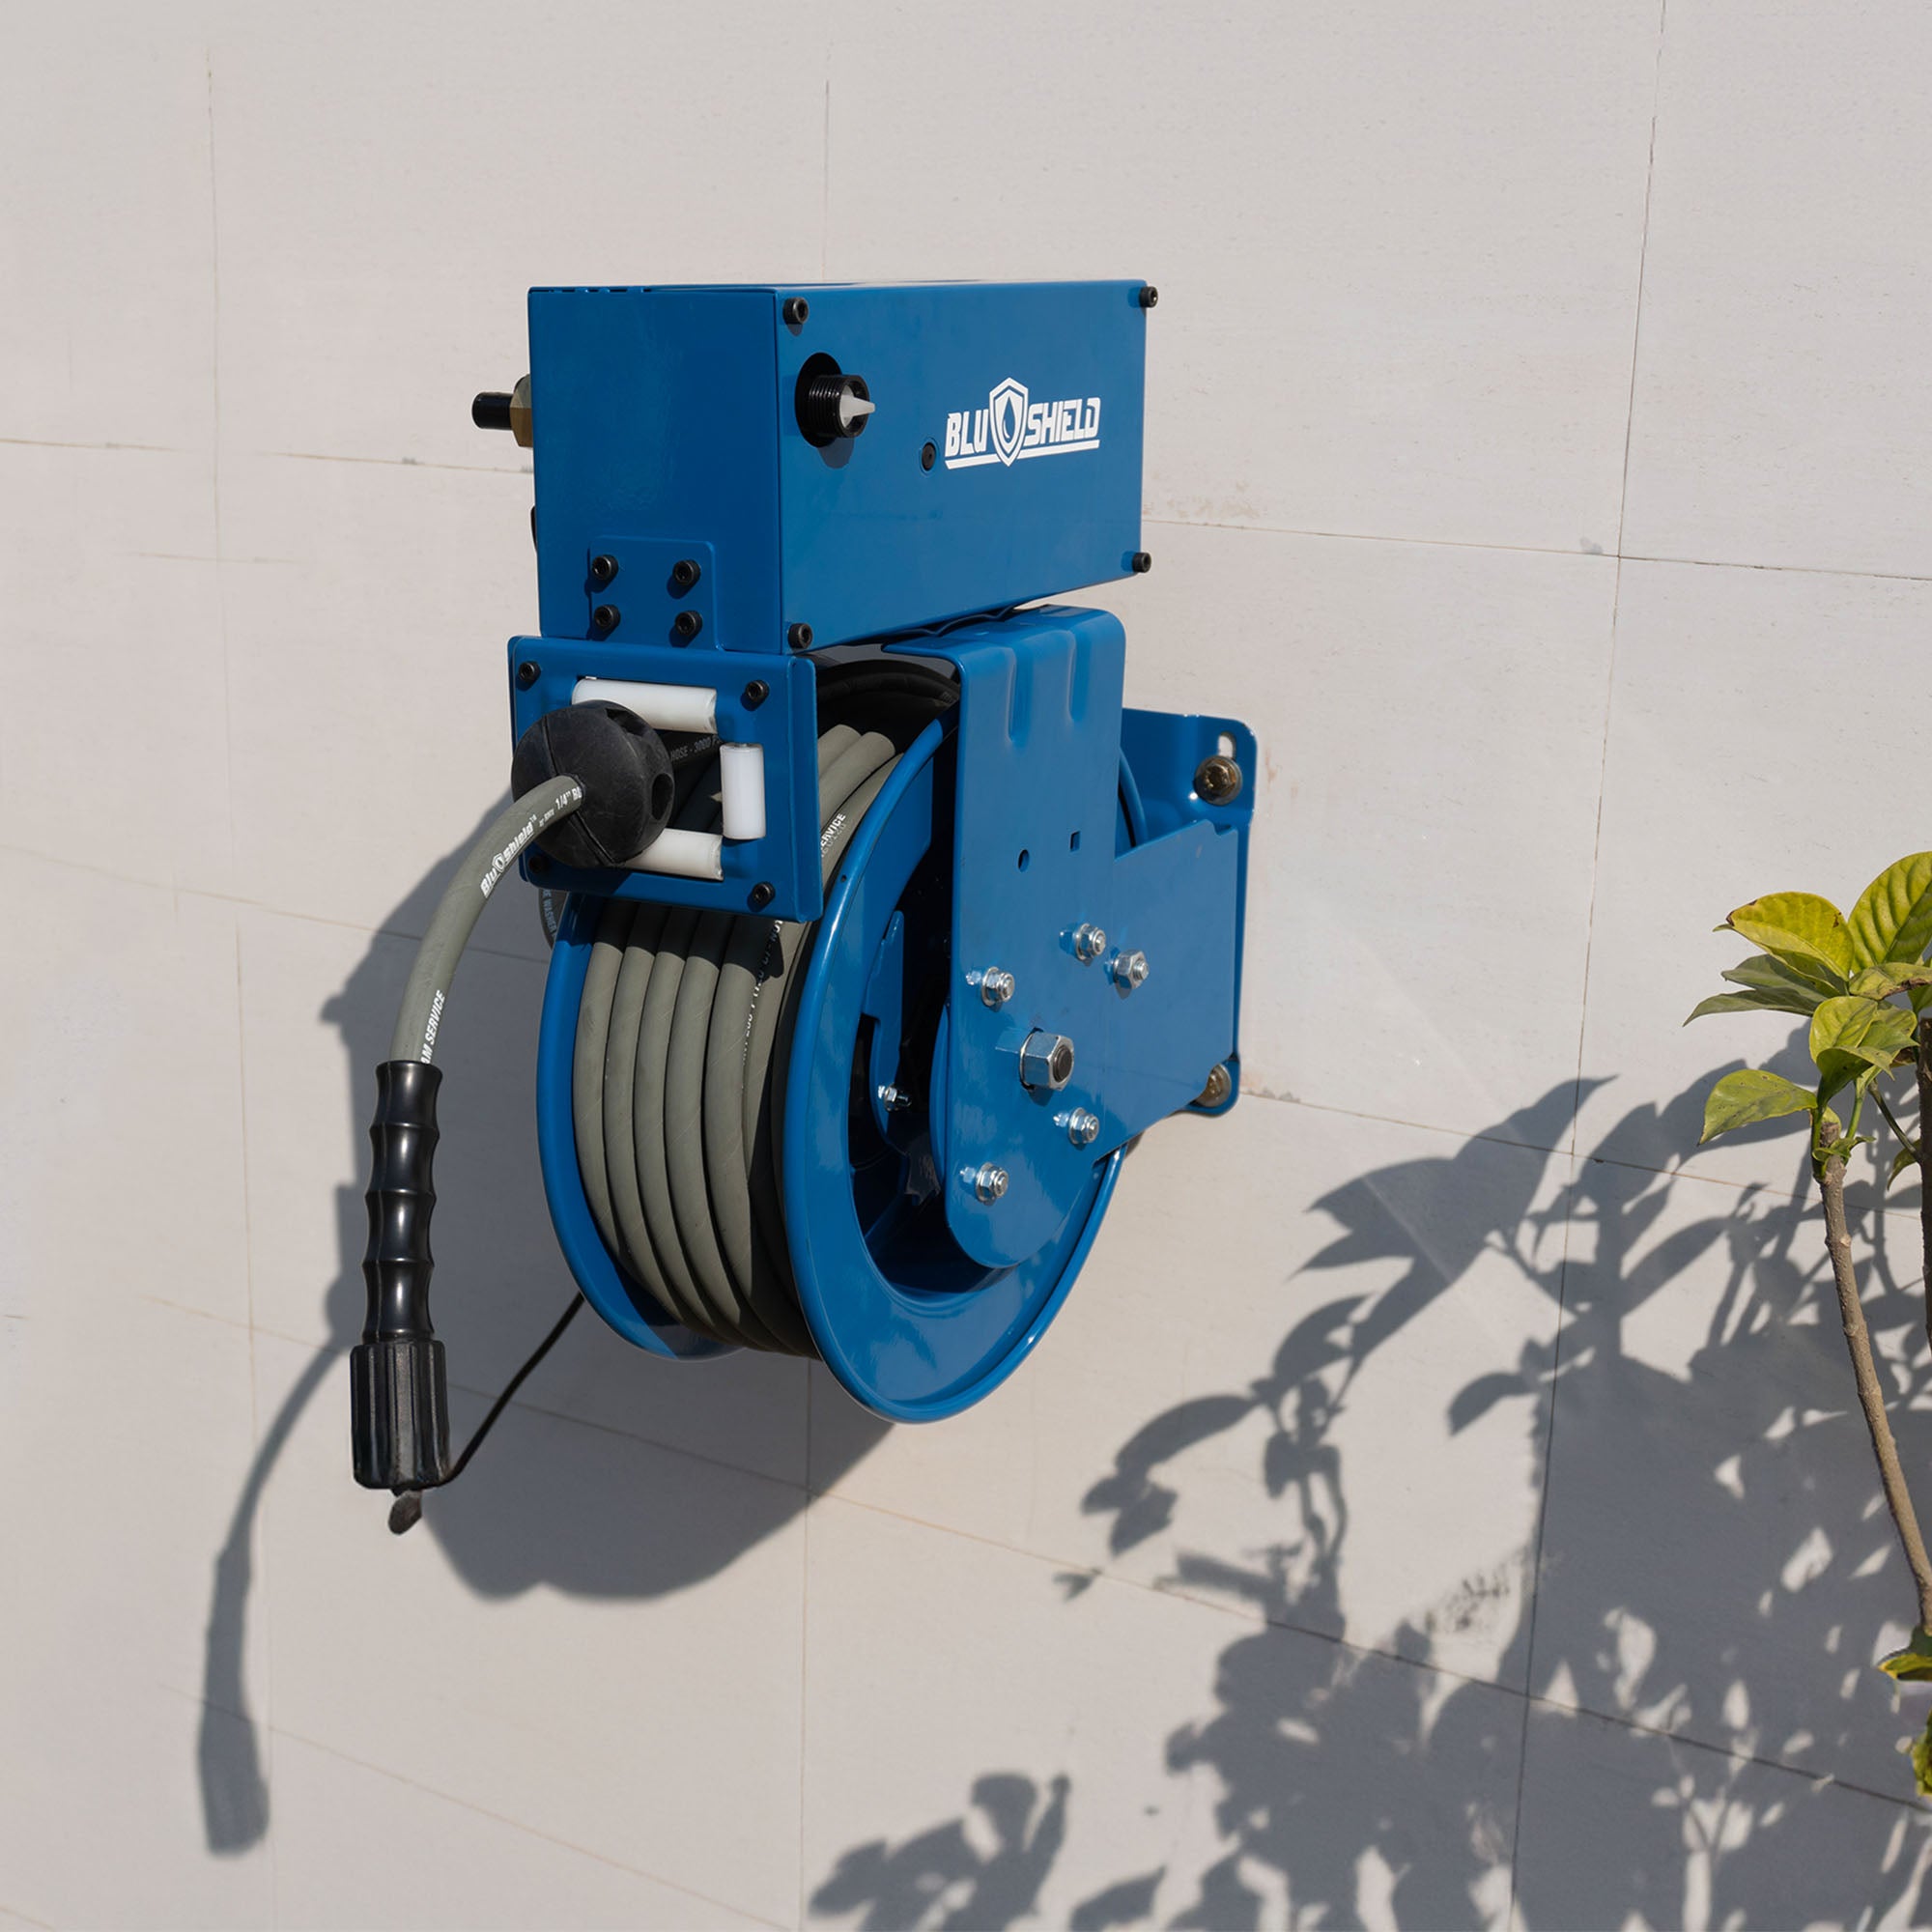 BluShield HumpBack Hose Reel with Built-in Pressure Washer